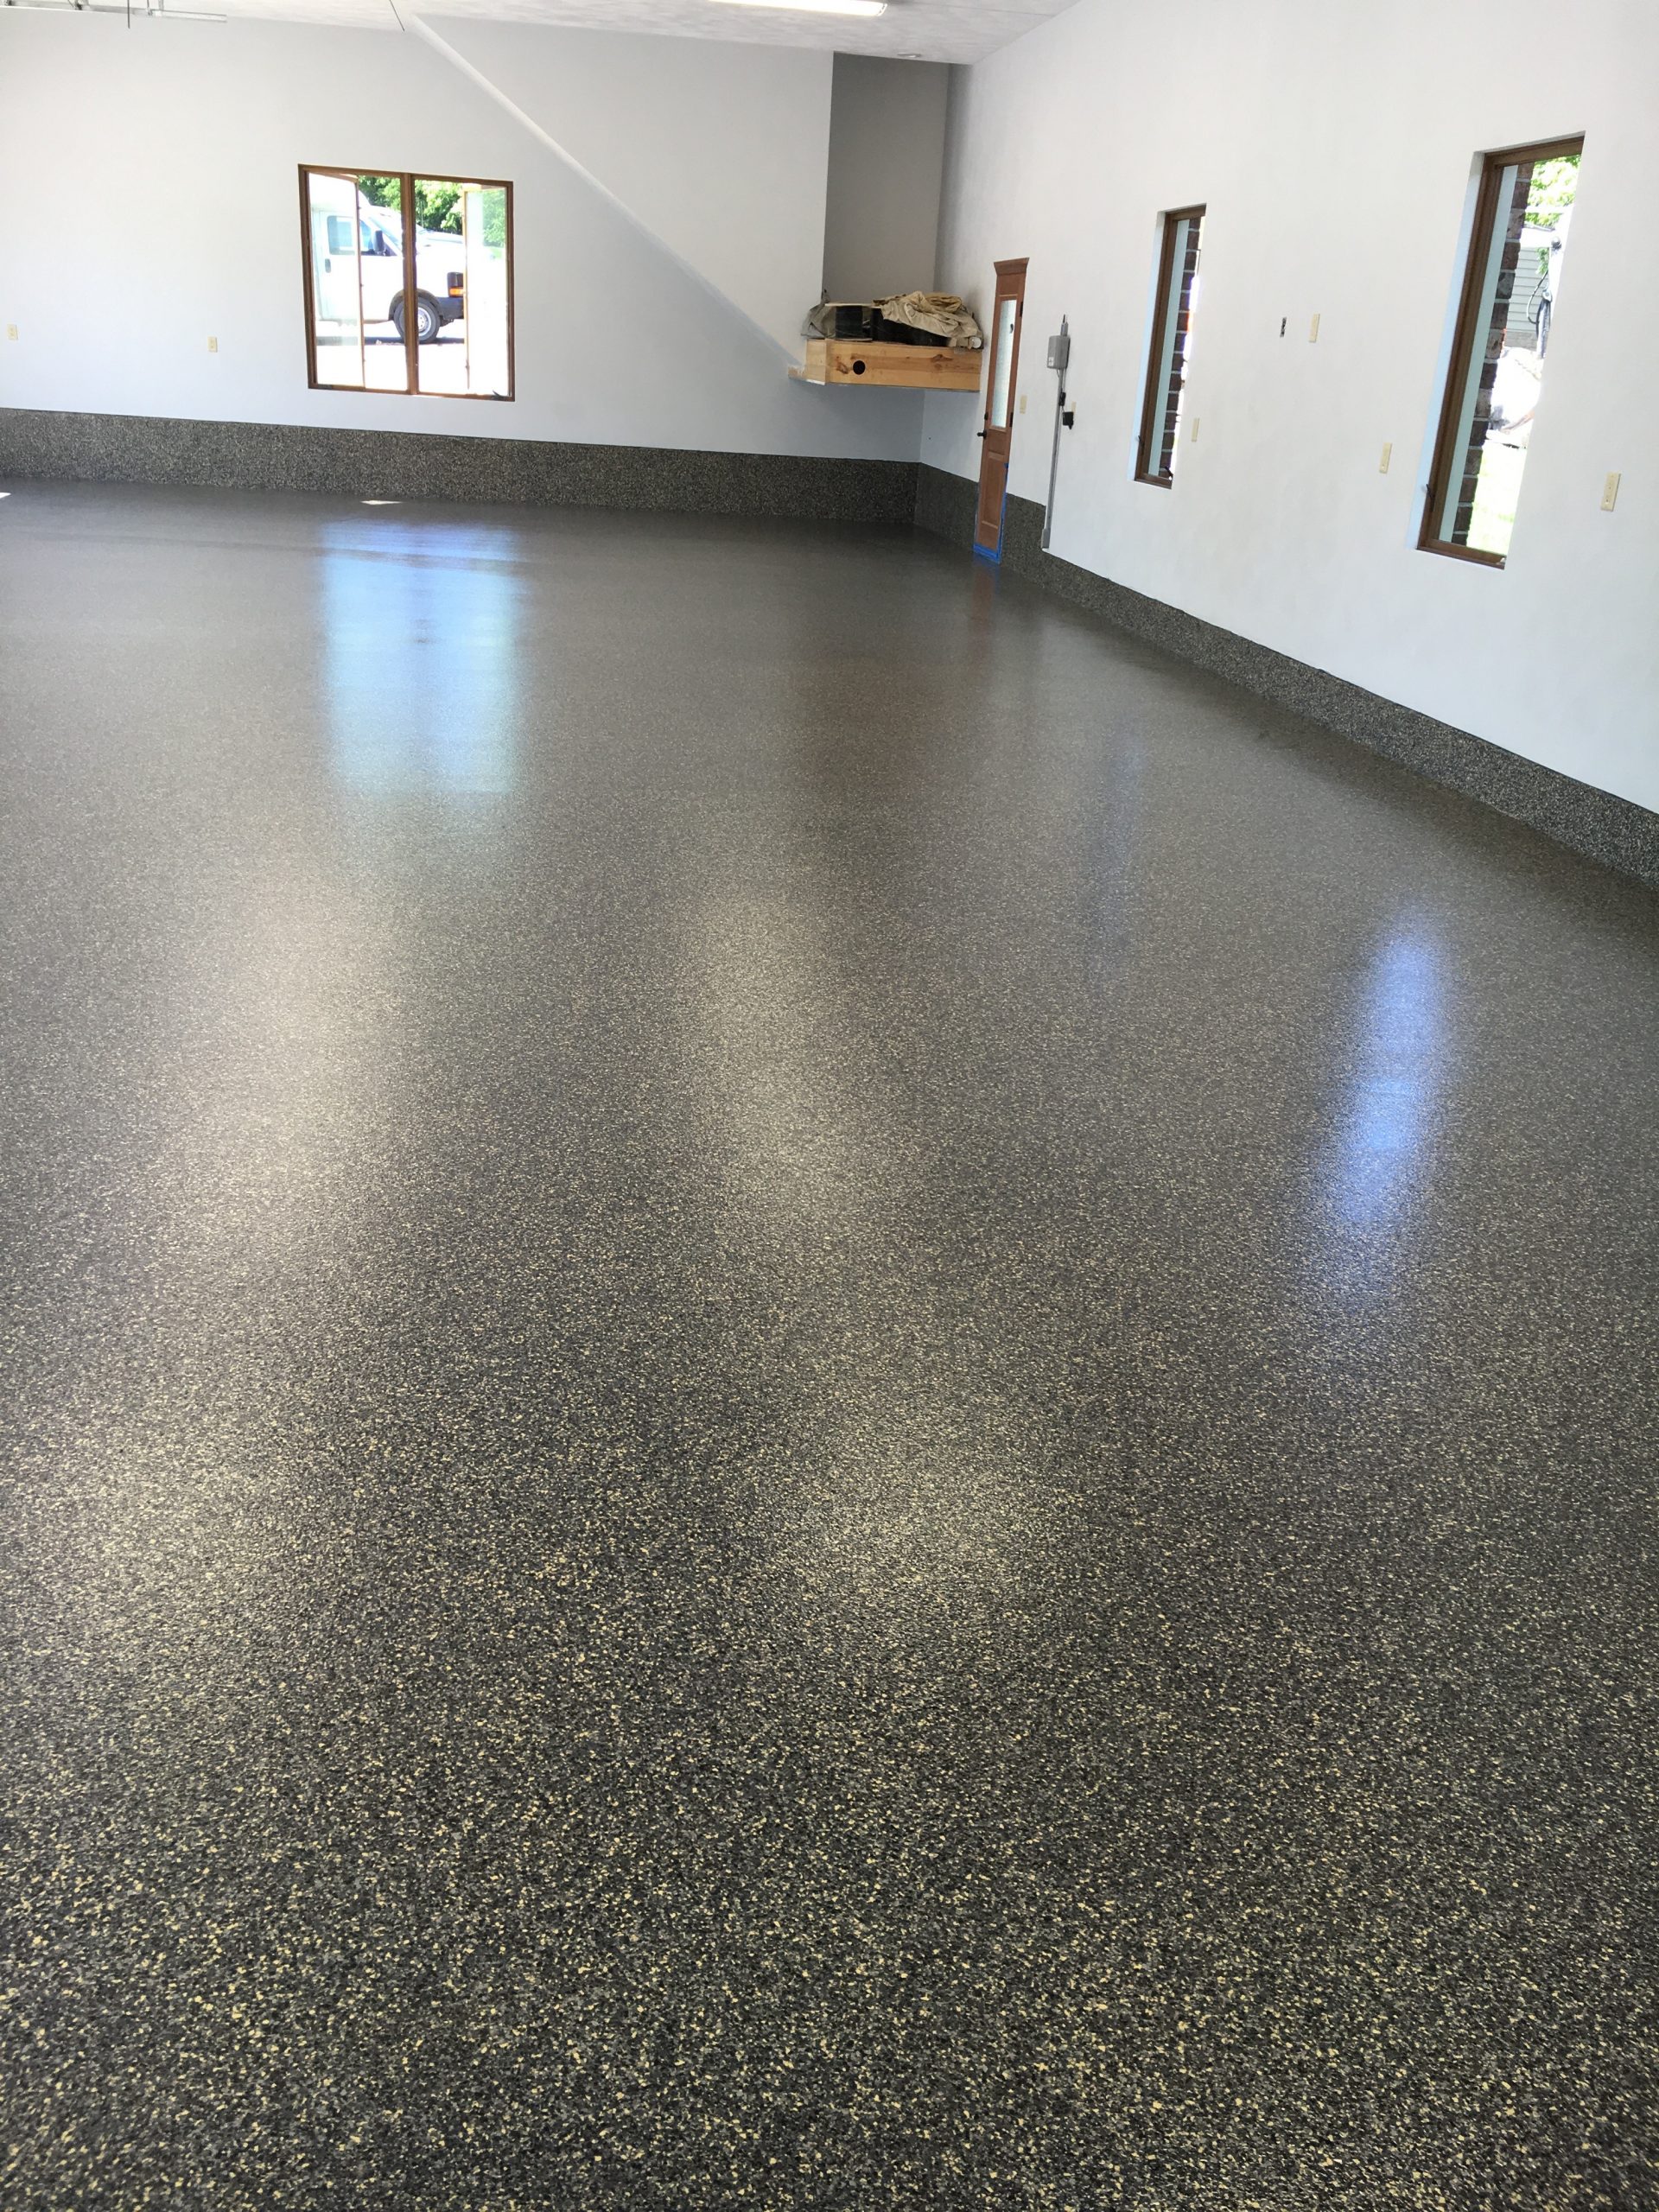 3 advantages of concrete floors in your
home